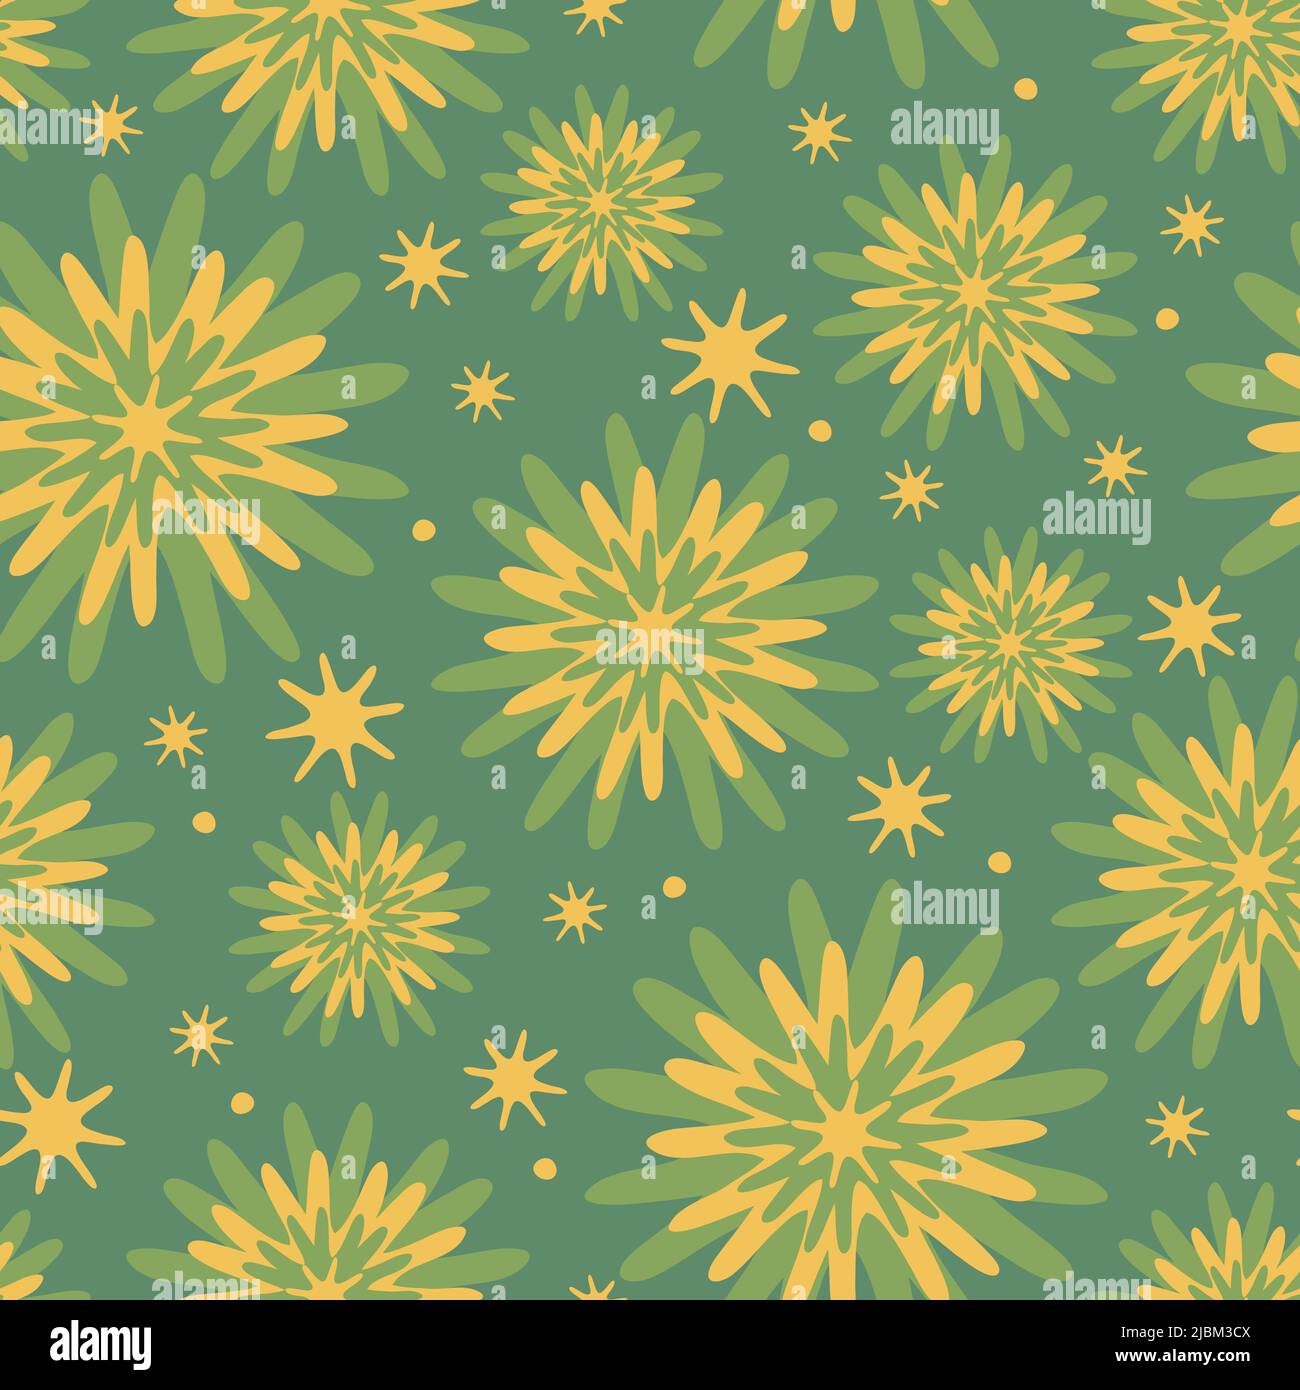 Seamless vector pattern with pastel yellow flower blooms on green background. Tie dye floral decorative wallpaper design. Stock Vector